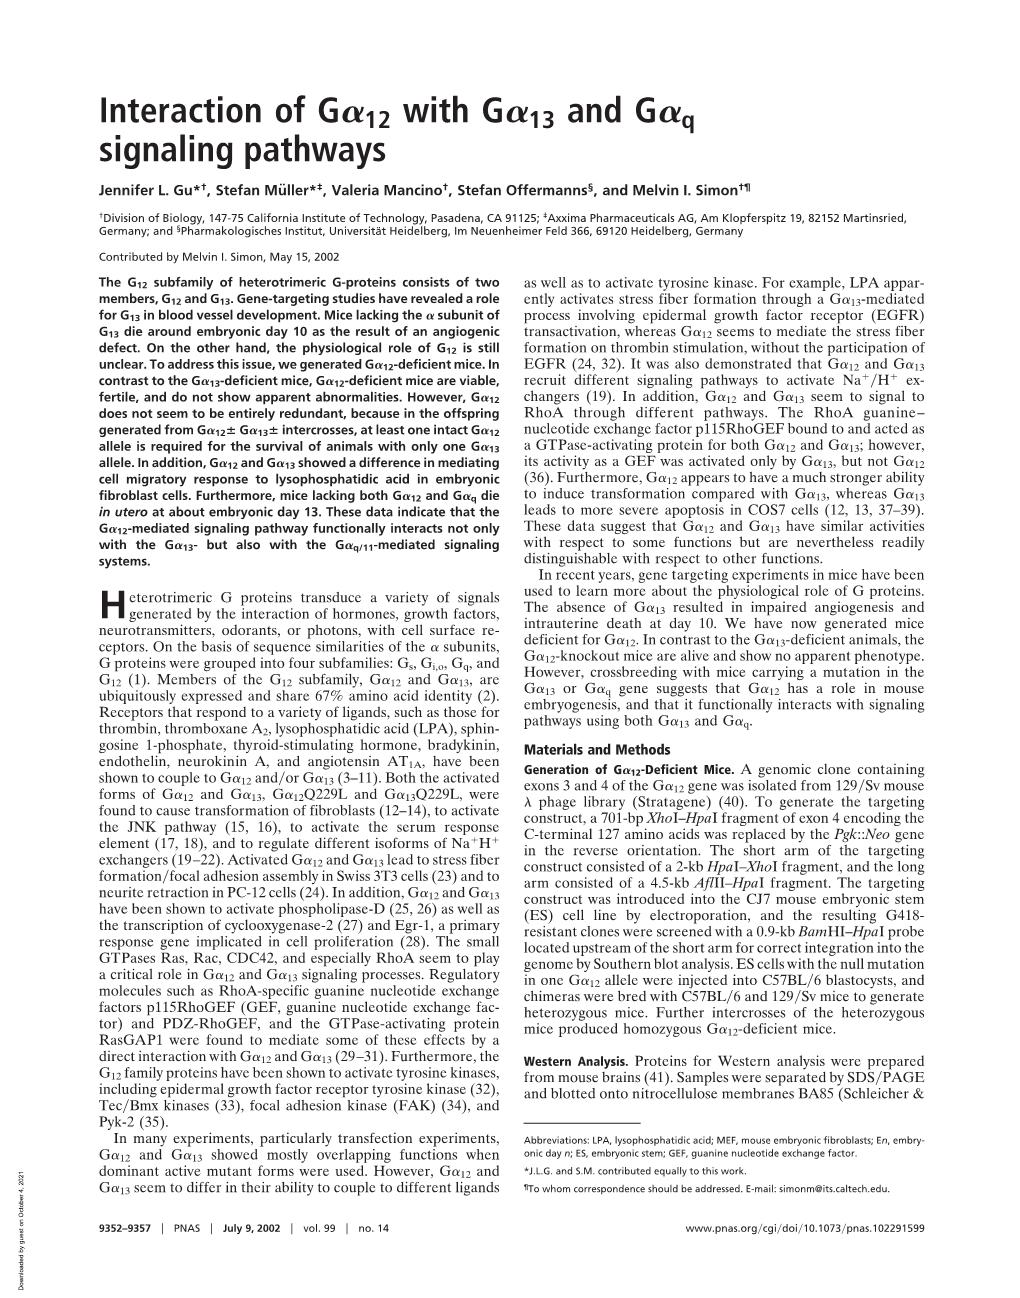 Interaction of G 12 with G 13 and G Q Signaling Pathways